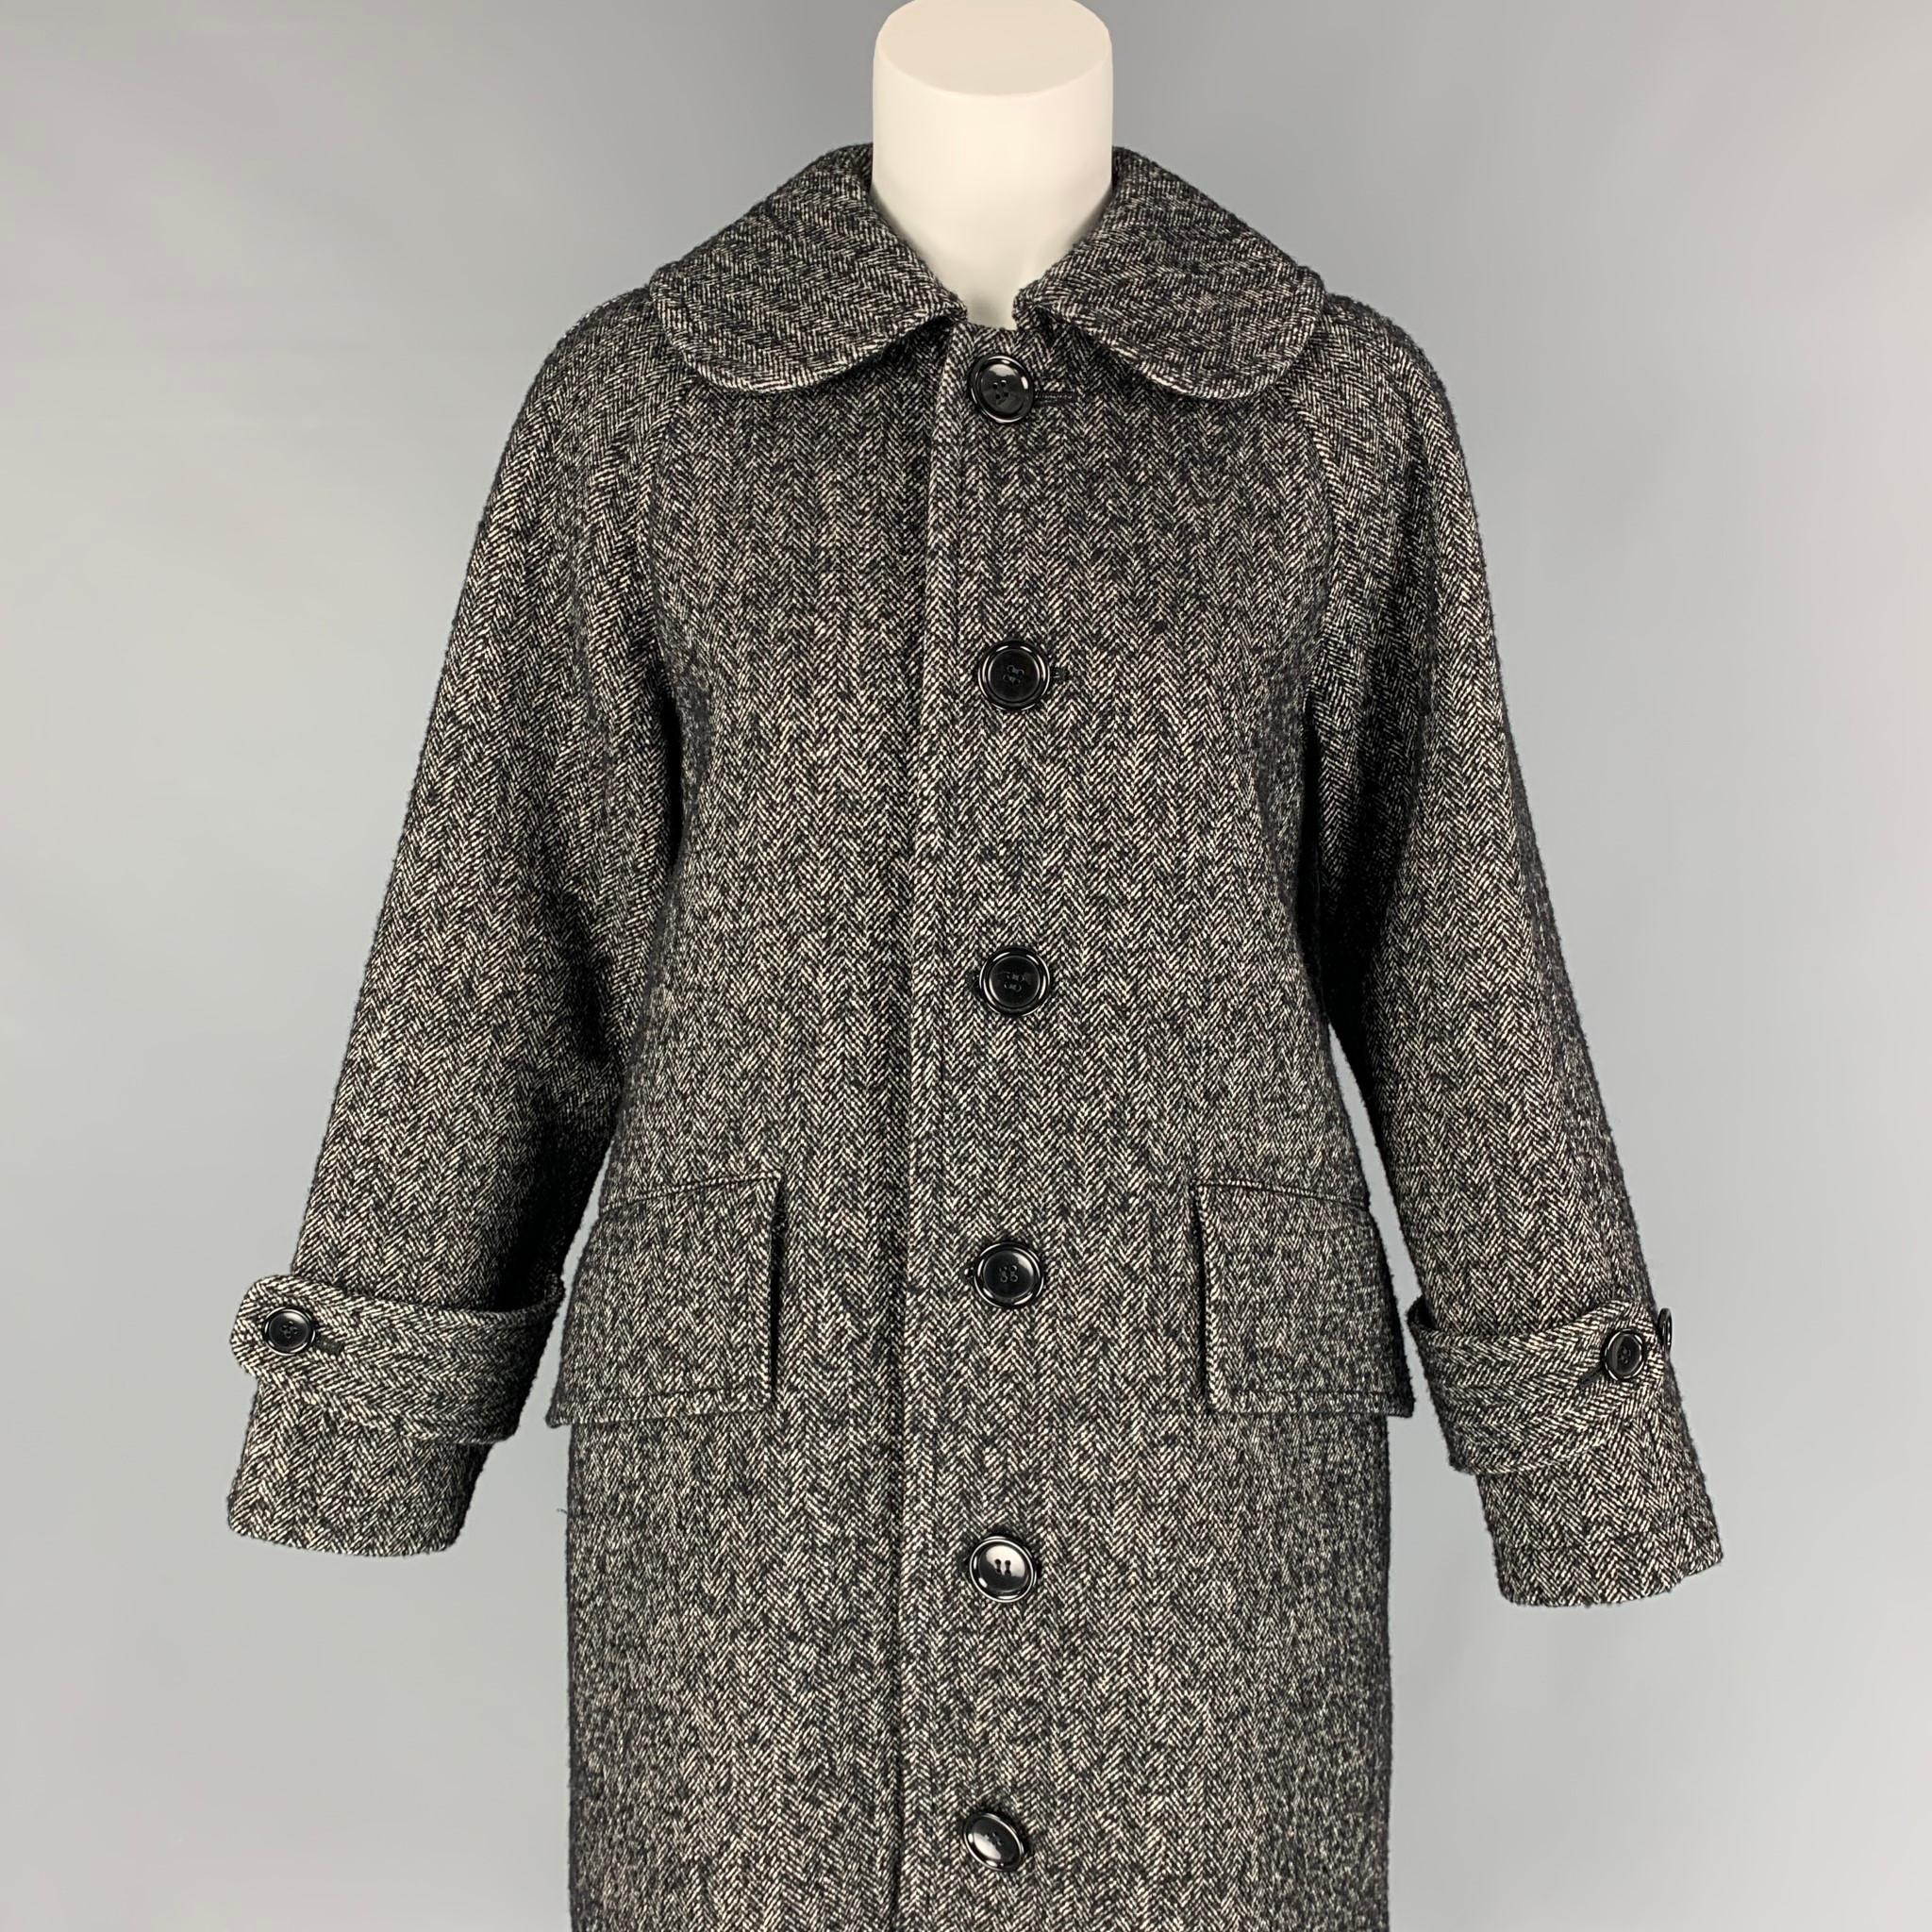 COMME des GARCONS TRICOT coat comes in a black & white herringbone wool blend with a full liner featuring a large collar, back strap, flap pockets, and a buttoned closure. Made in Japan. 

Excellent Pre-Owned Condition.
Marked: M /